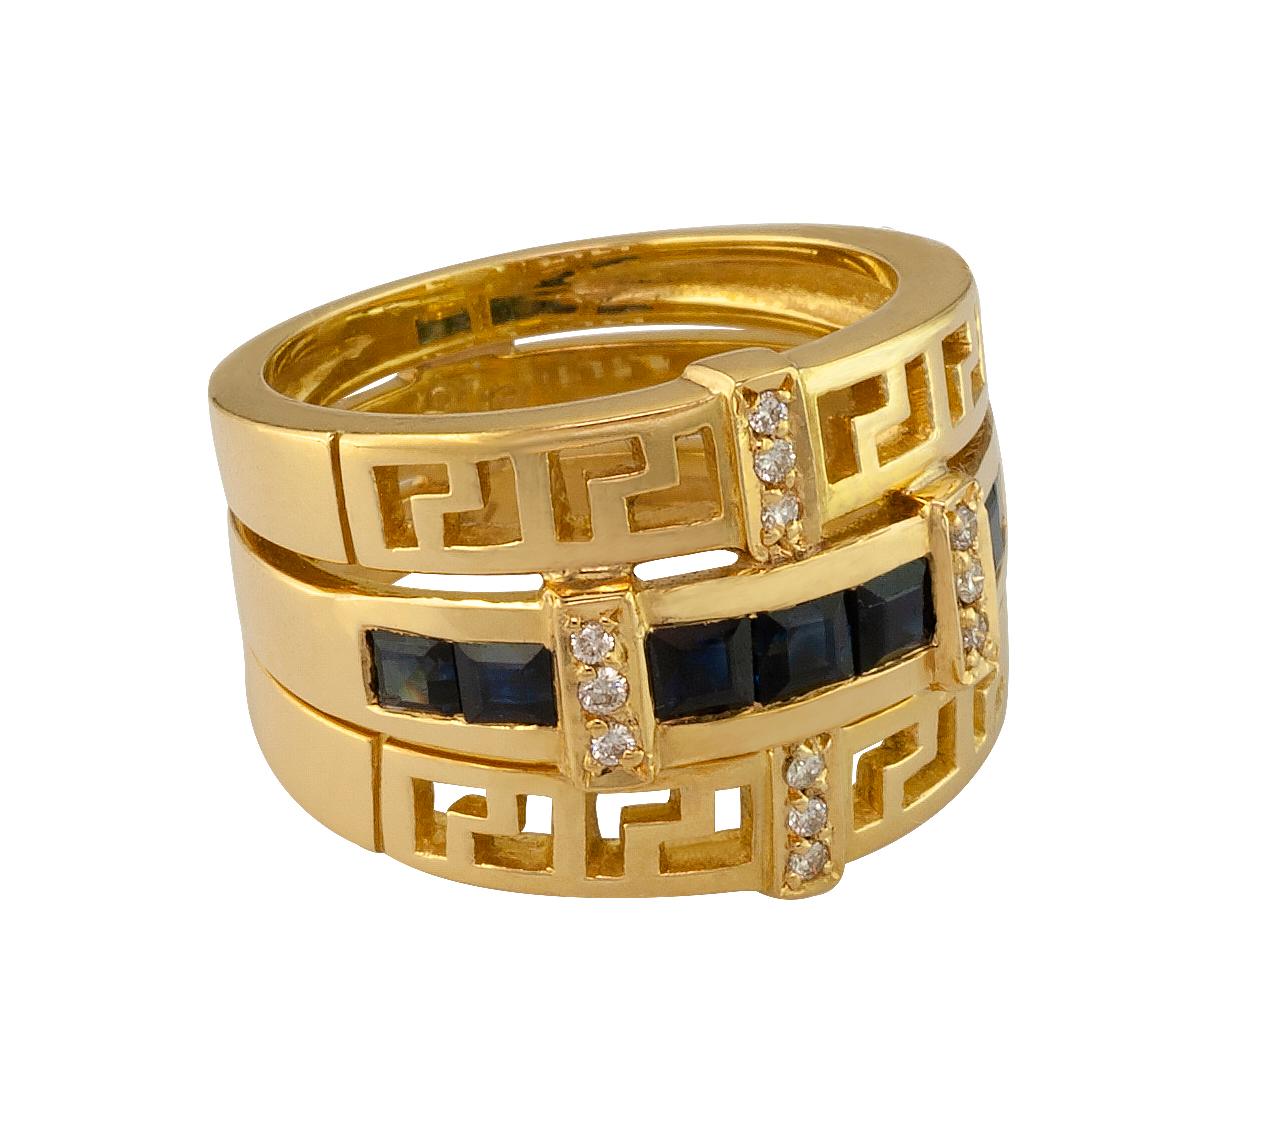 S.Georgios designer 18 Karat Yellow Gold Ring features the Greek Key design which symbolizes eternity. The gorgeous band has 12 Brilliant Cut White Diamonds total weight of 0.11 Carat and 7 Princess cut  Sapphires total weight of 1.45 Carat. 
The